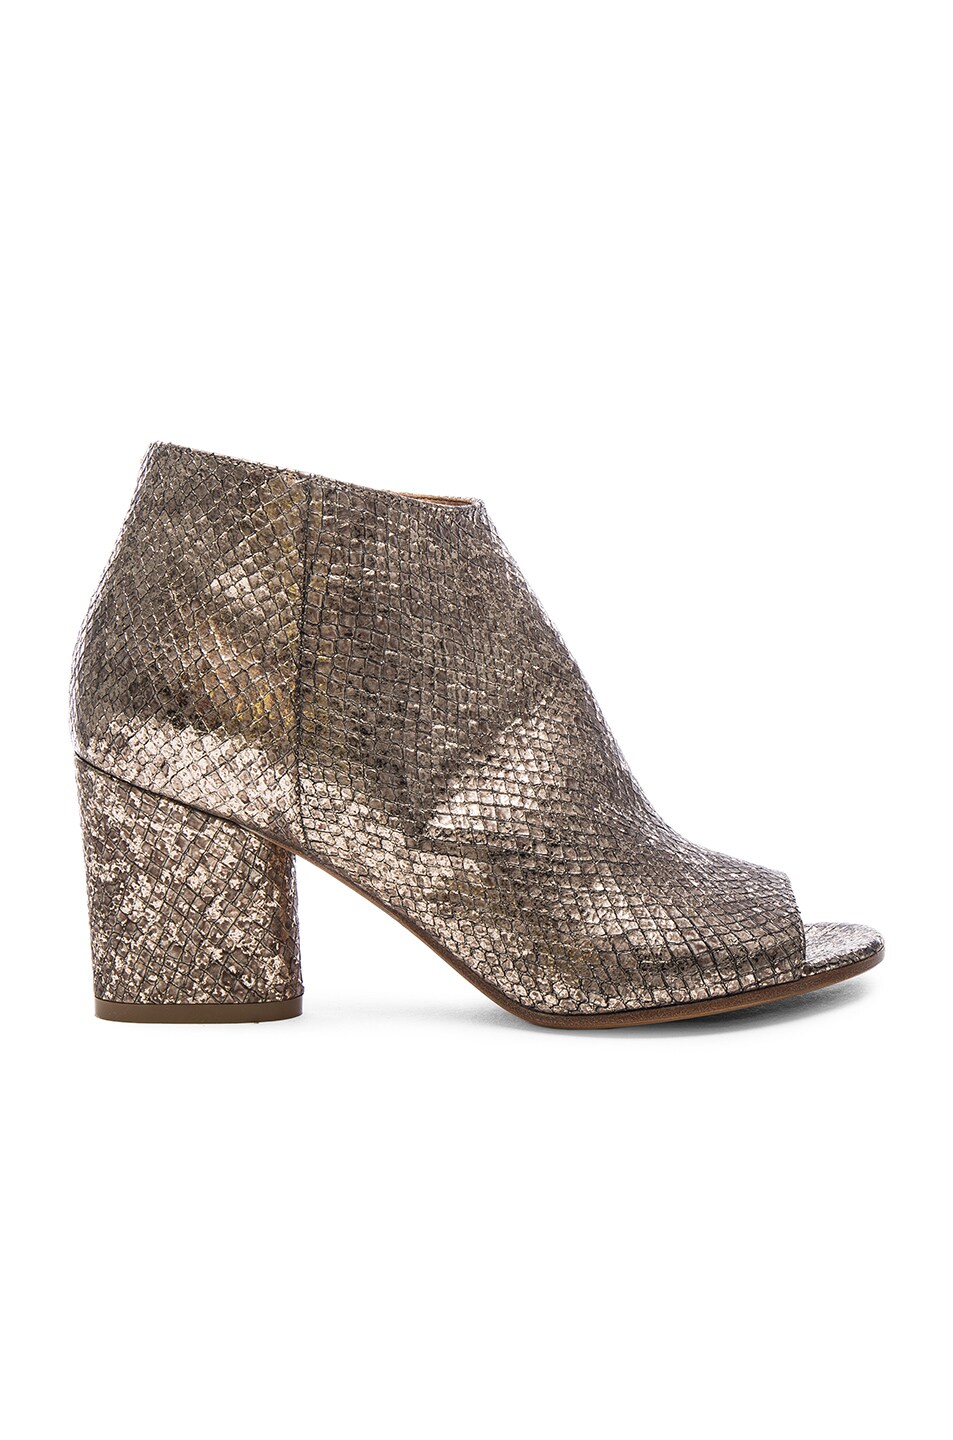 Image 1 of Maison Margiela Peep Toe Bootie in Champagne